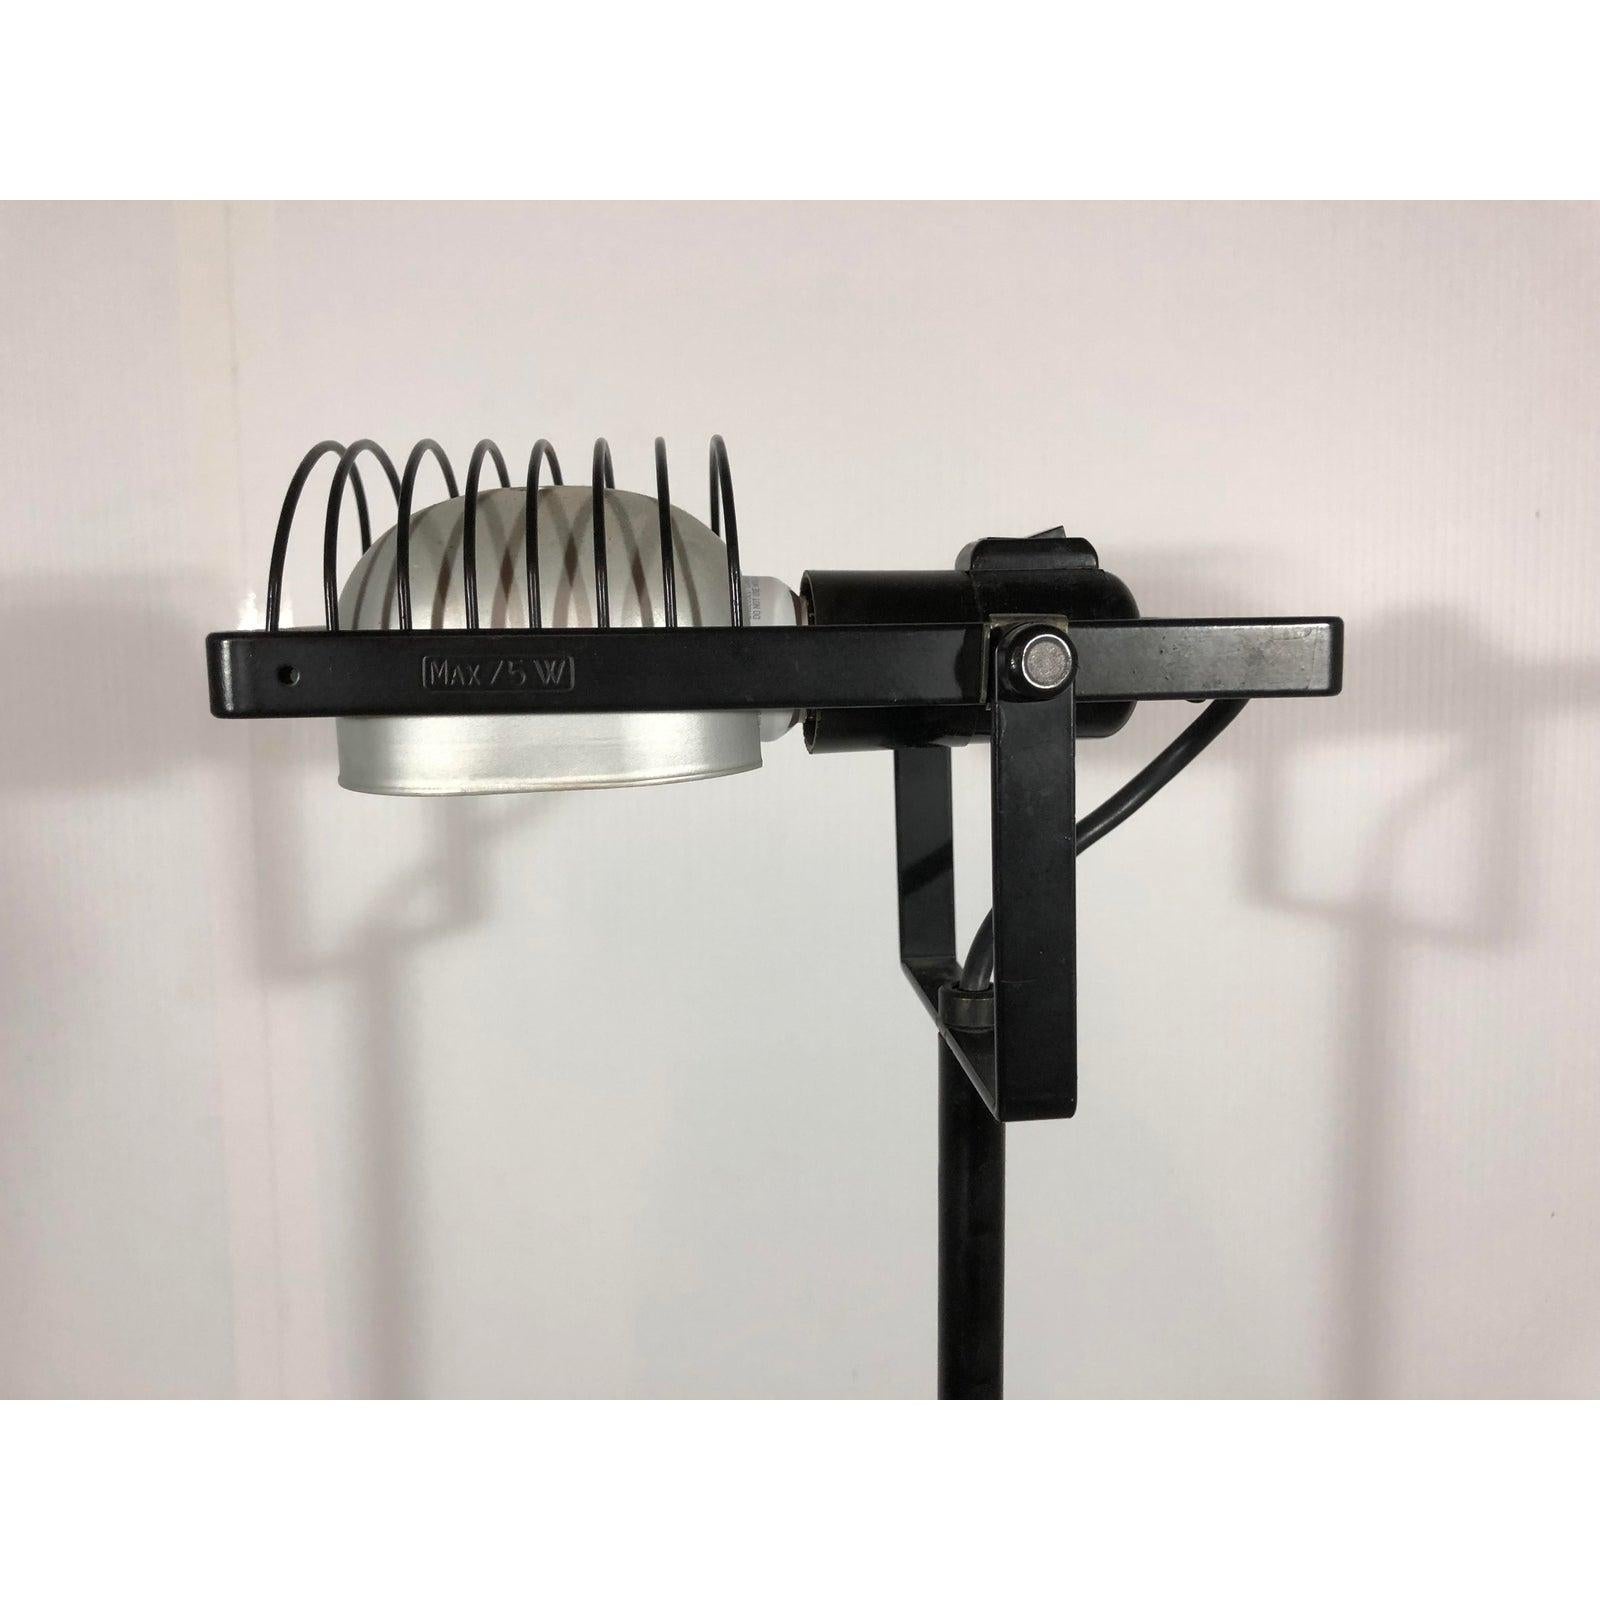 Adjustable Sintesi desk or table lamp in black lacquer by Ernesto Gismondi for Artemide. Italy 1970s.

Sold individually.  One available. 